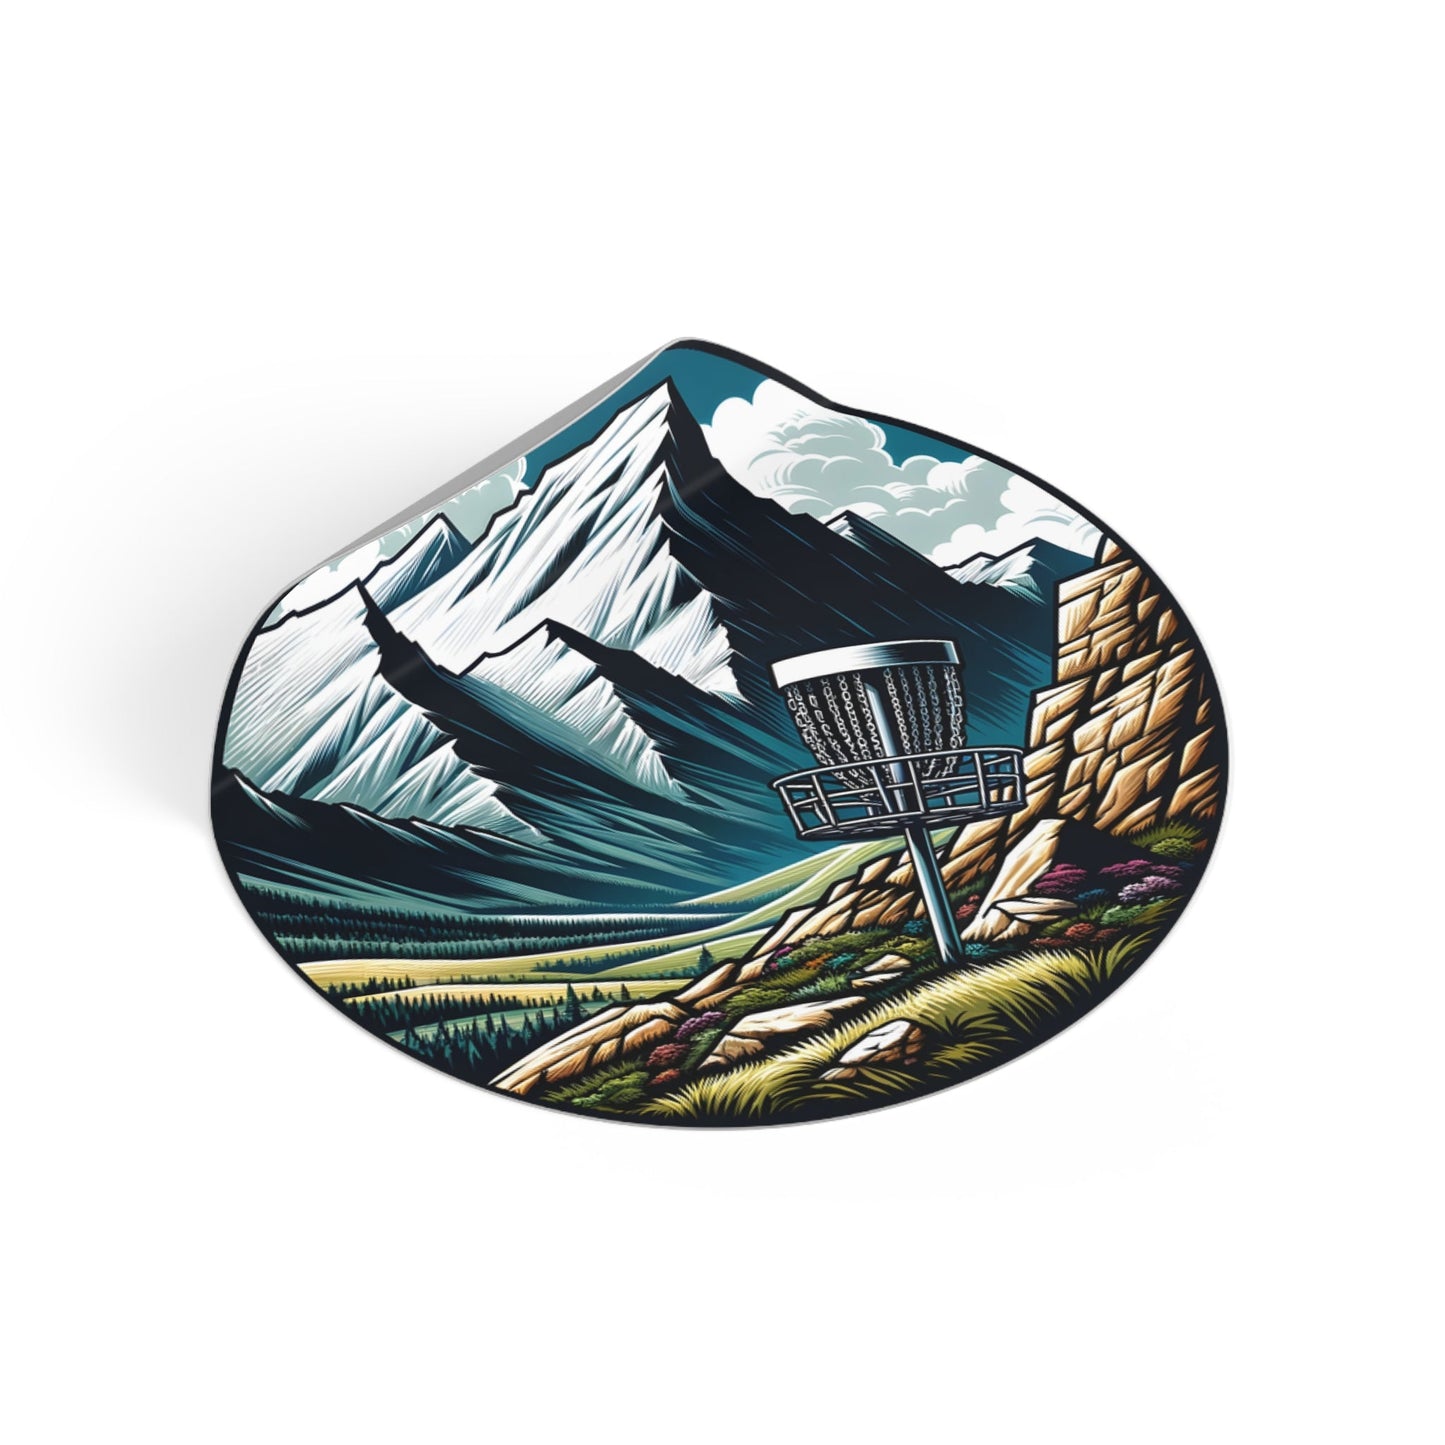 Disc Golf Basket by Mountain v2 - Round Vinyl Stickers - Quirky Goodies